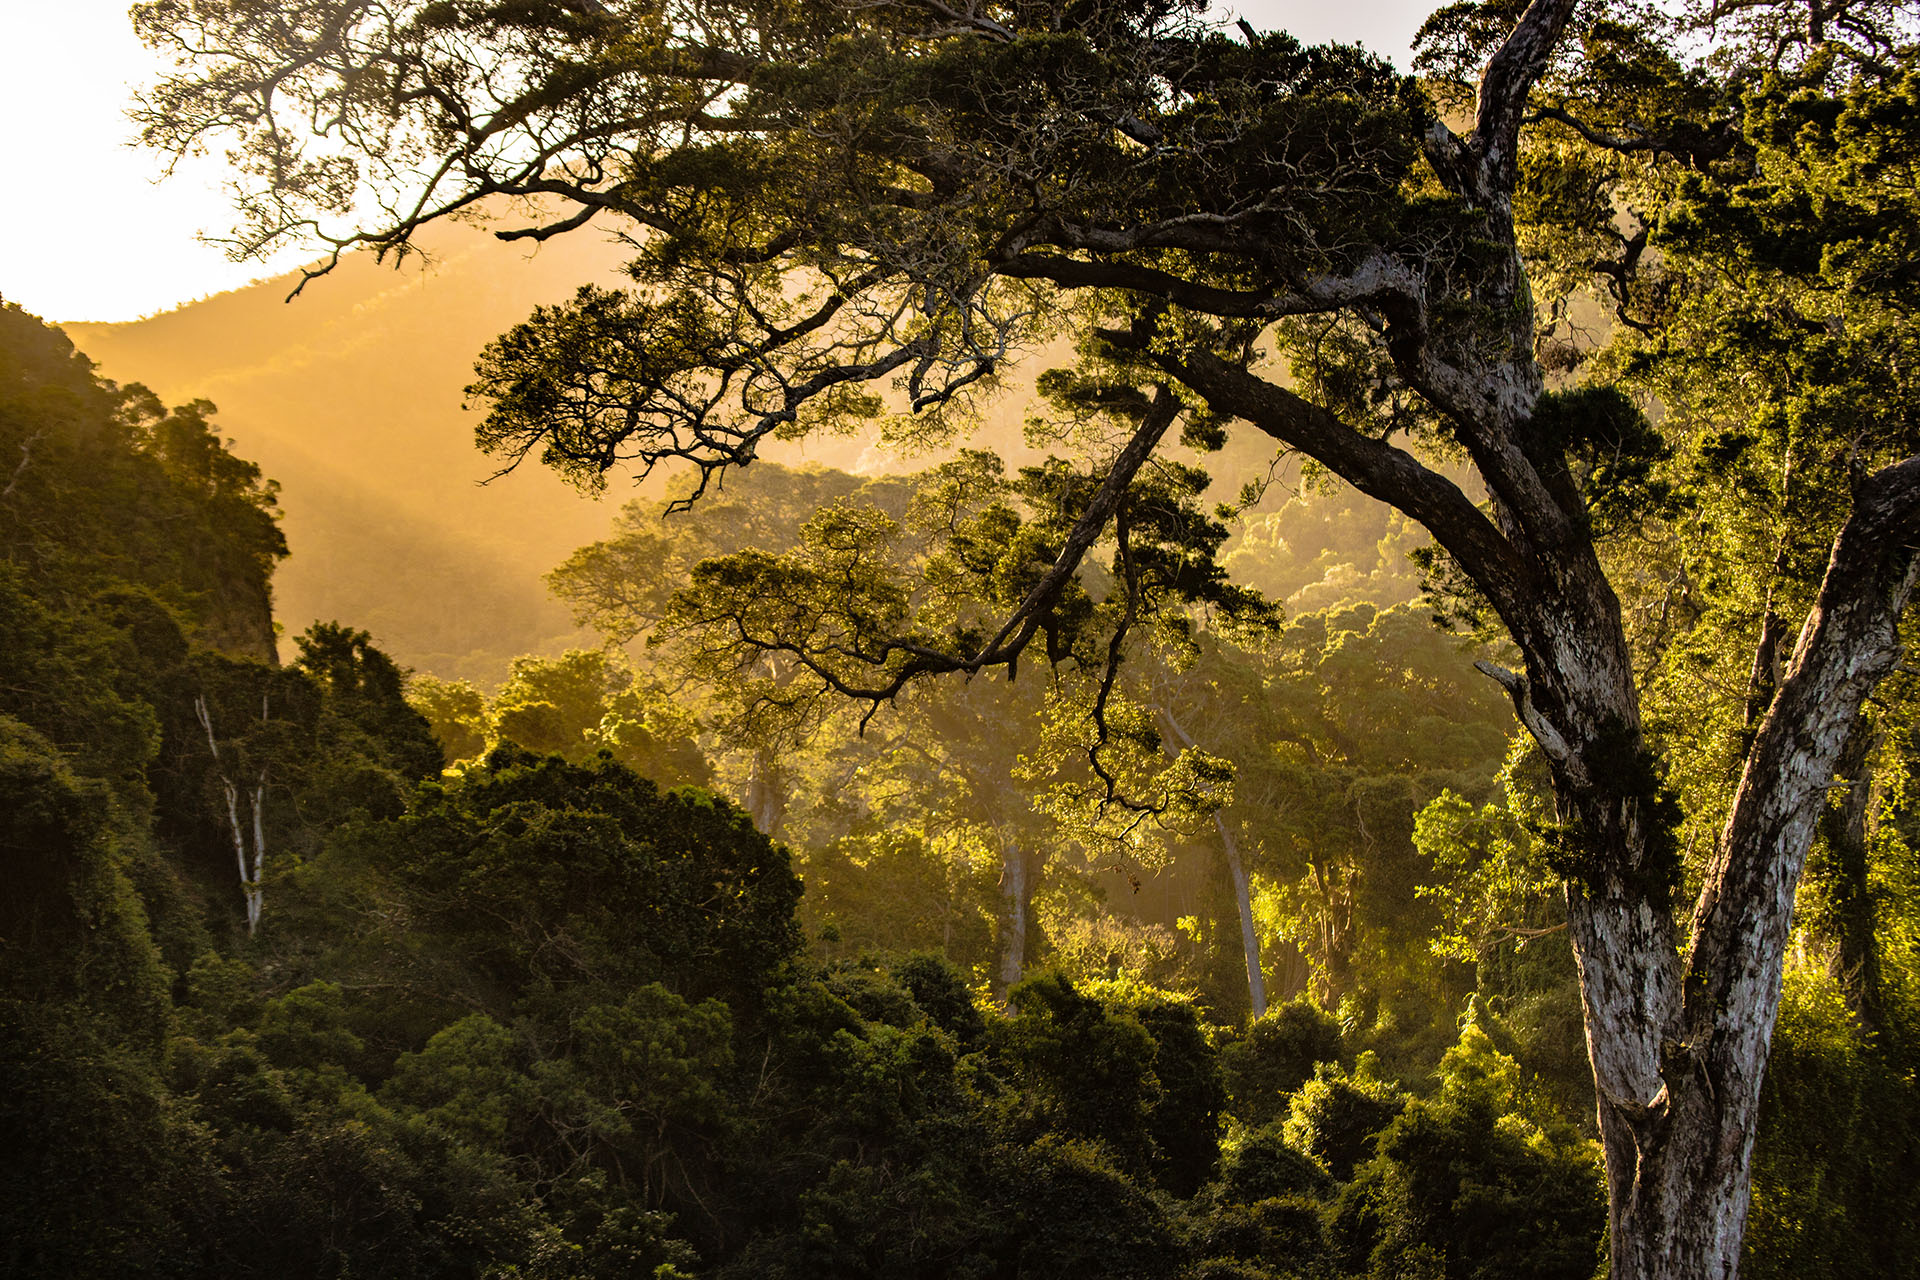 A forest in South Africa (credit: Unsplash)